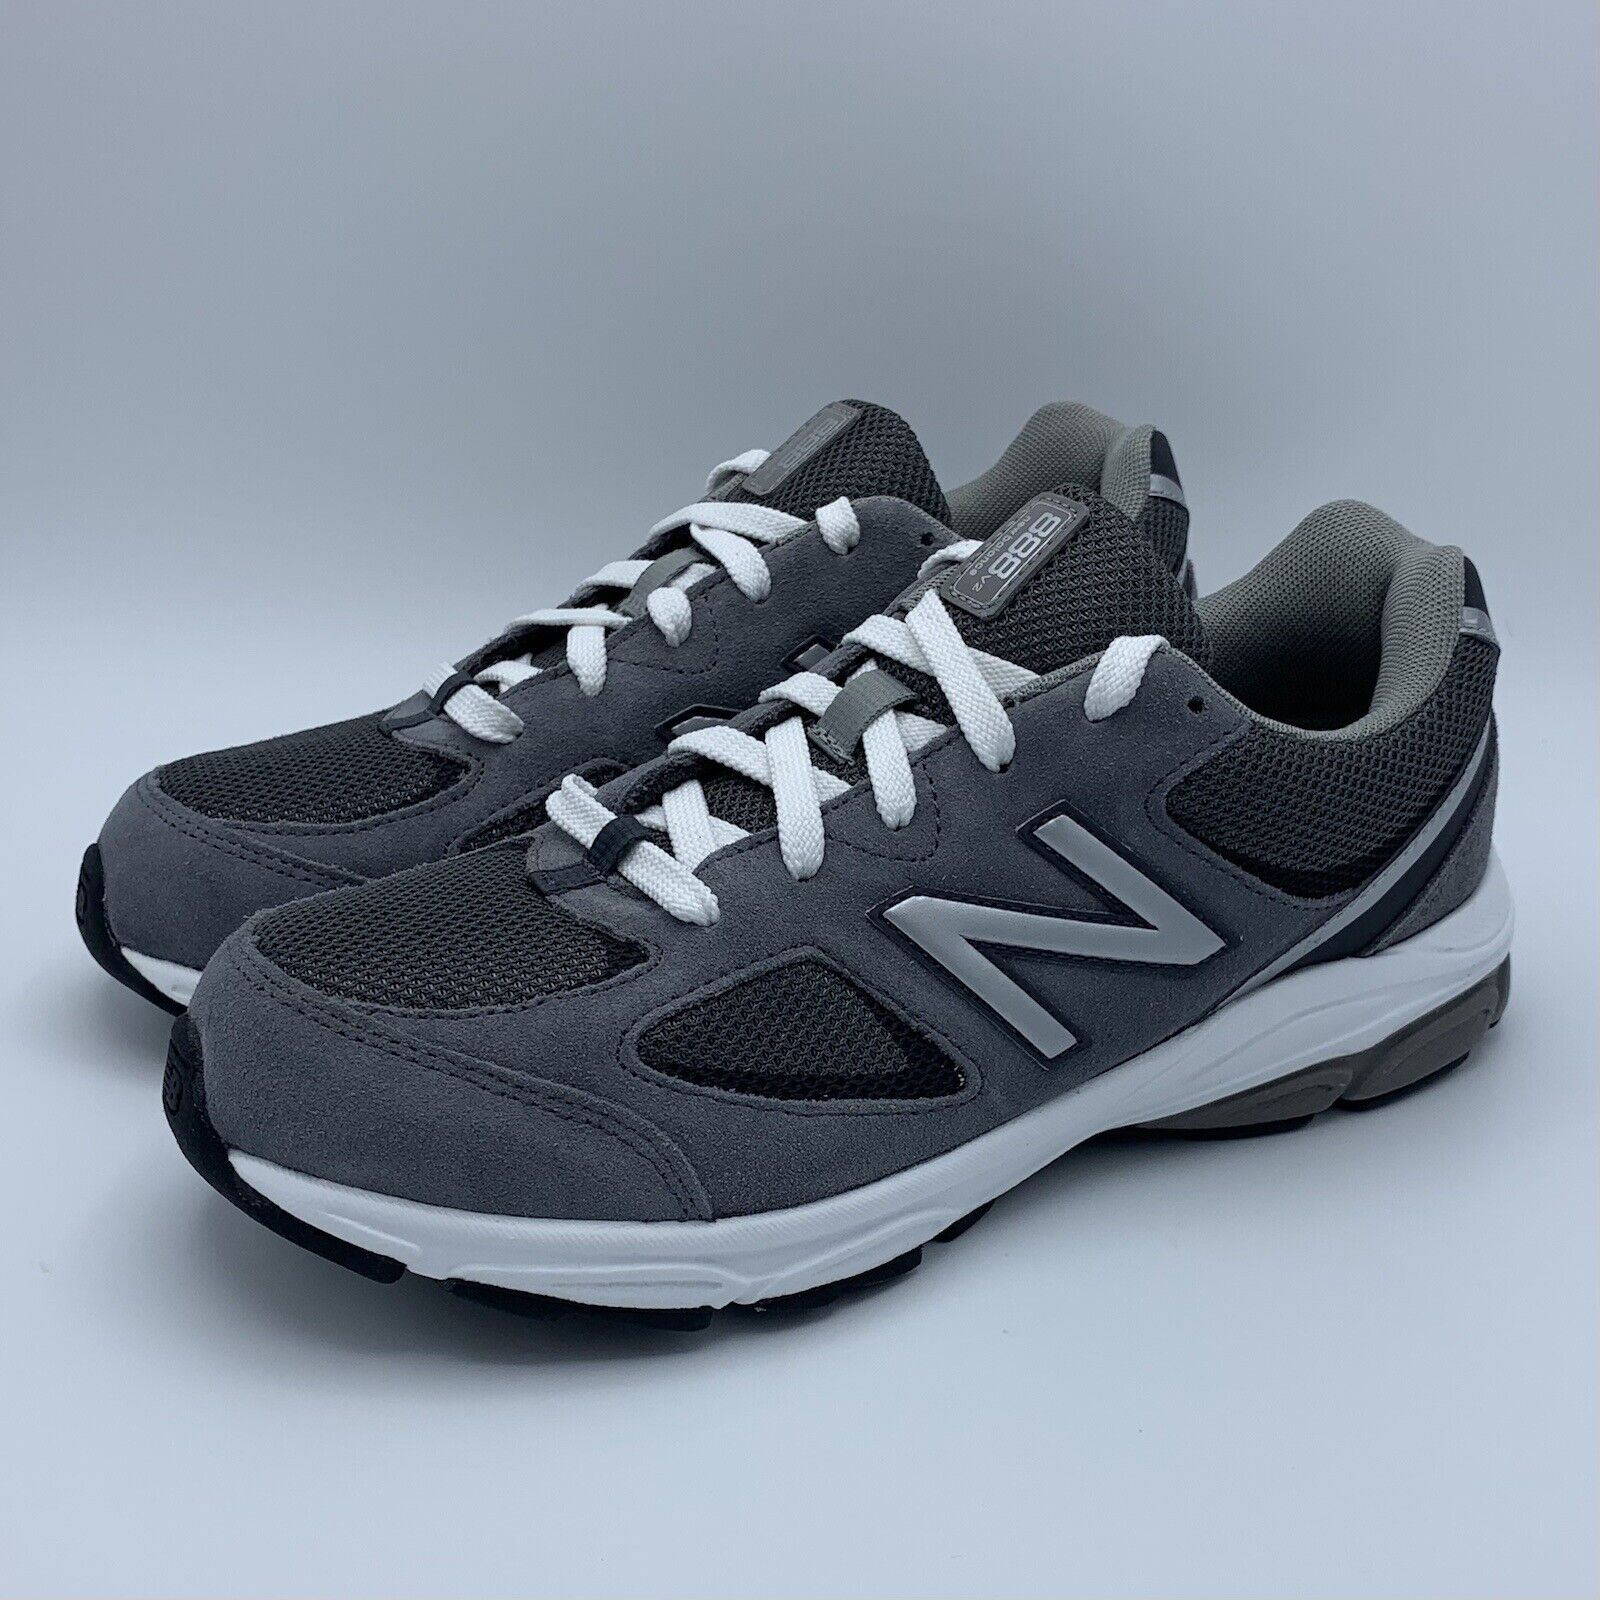 New Balance 888v2 ‘Dark Grey’ Men’s Size 7 New Without Box for Sale ...